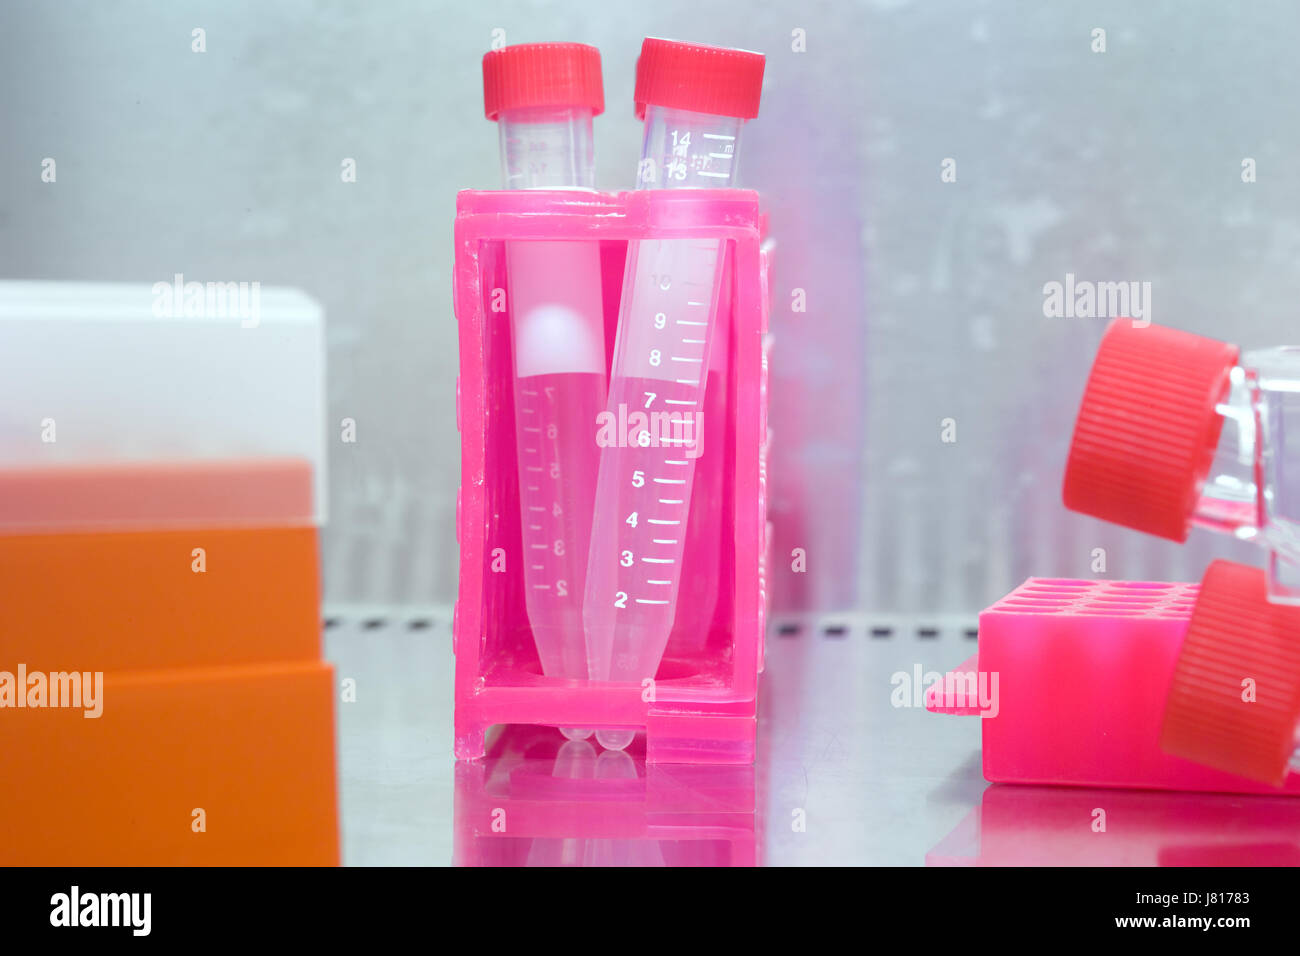 Pink plastic holder with sealed tubes of reacting chemicals, in the fume cupboard of a bioscience research laboratory. Stock Photo